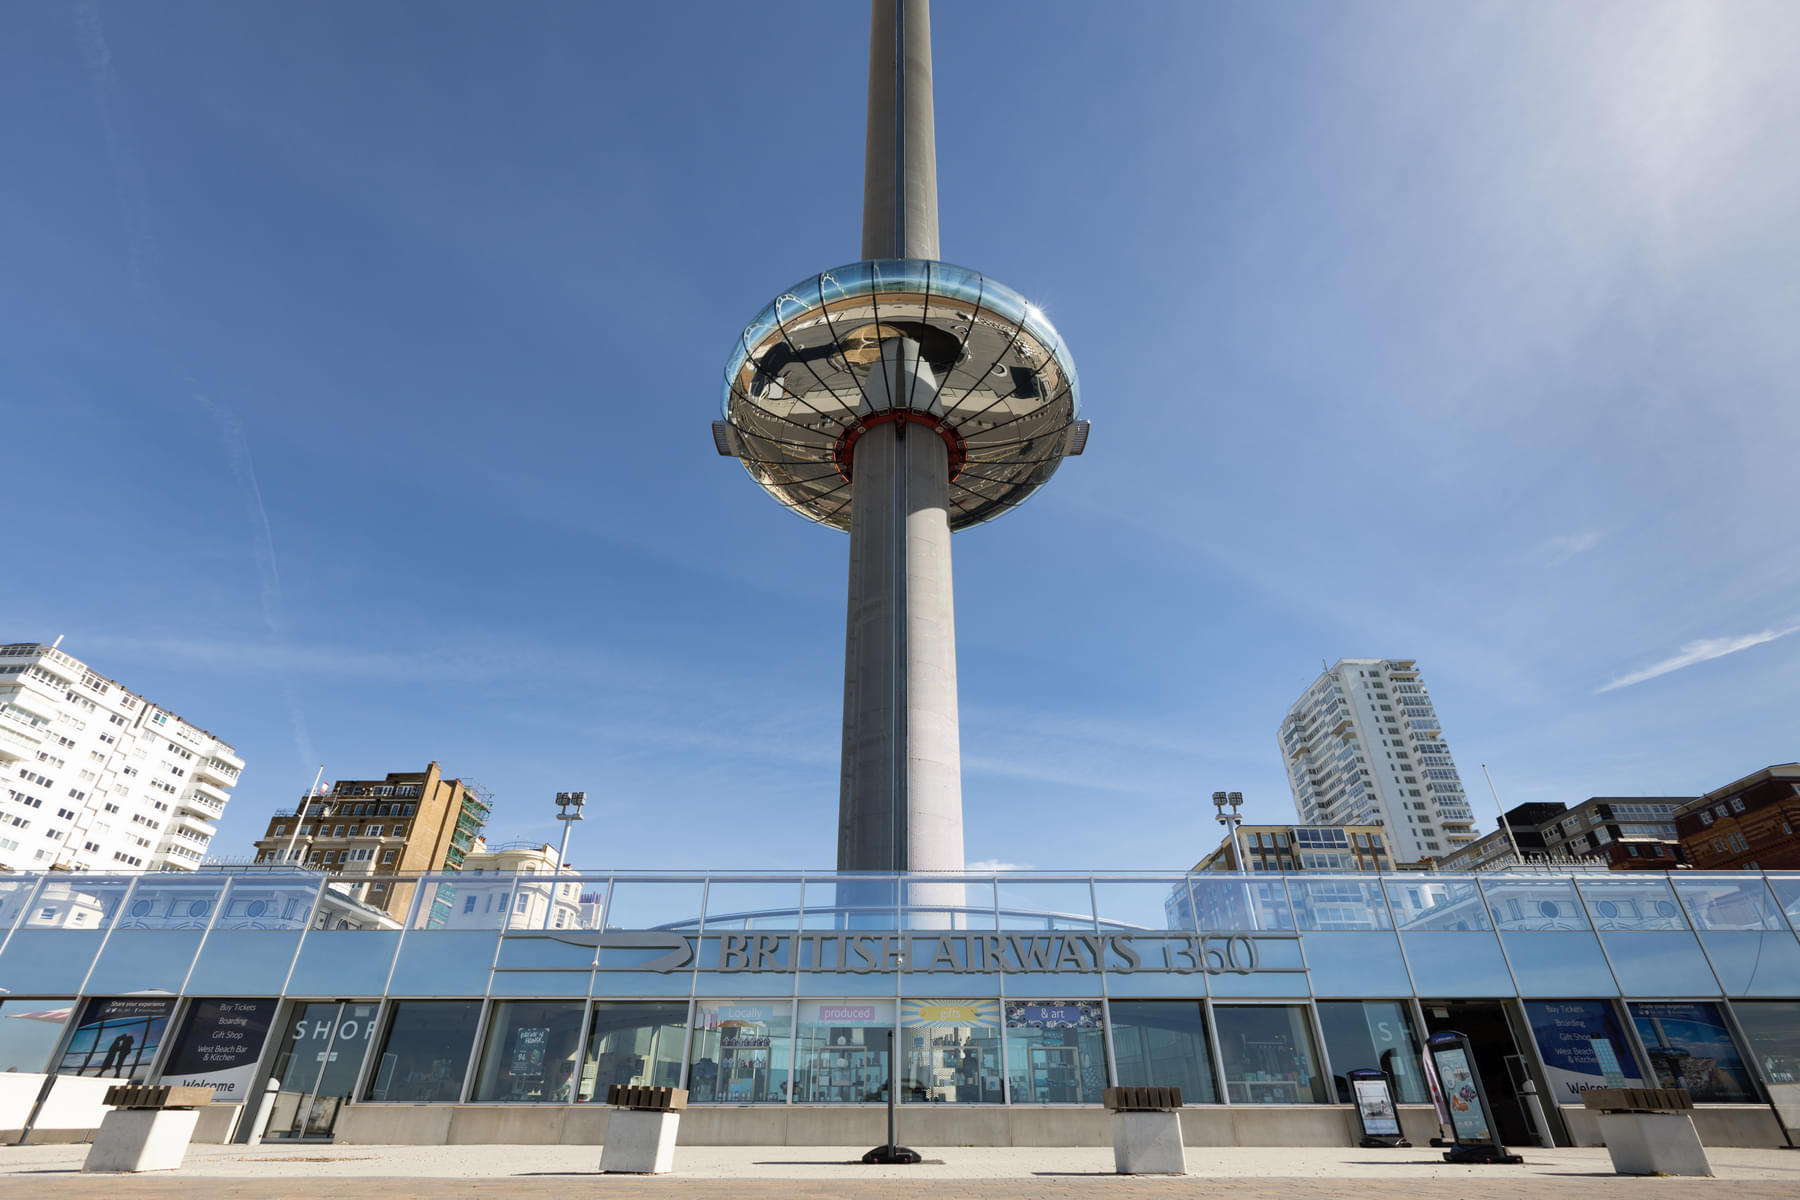 Ascend to the observation deck from where you will see the beautiful city skyline